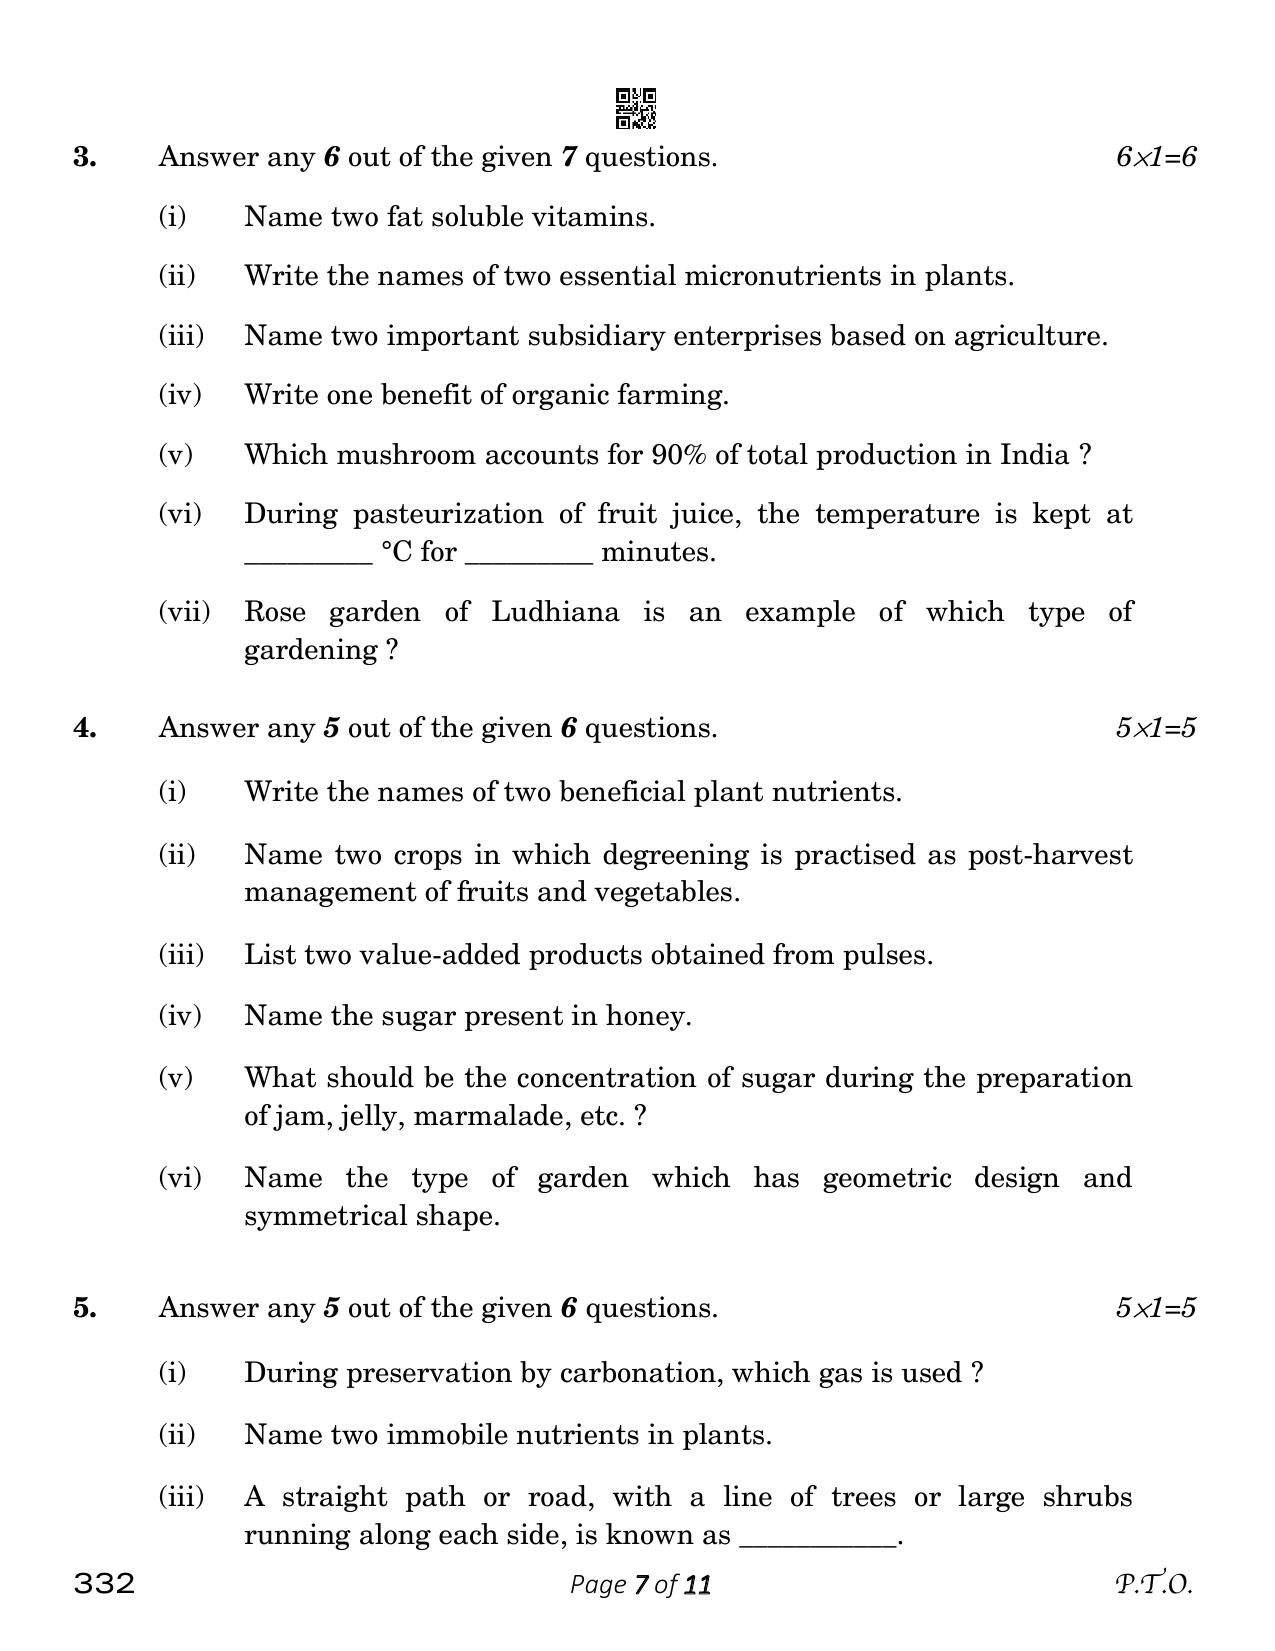 CBSE Class 12 Agriculture (Compartment) 2023 Question Paper - Page 7